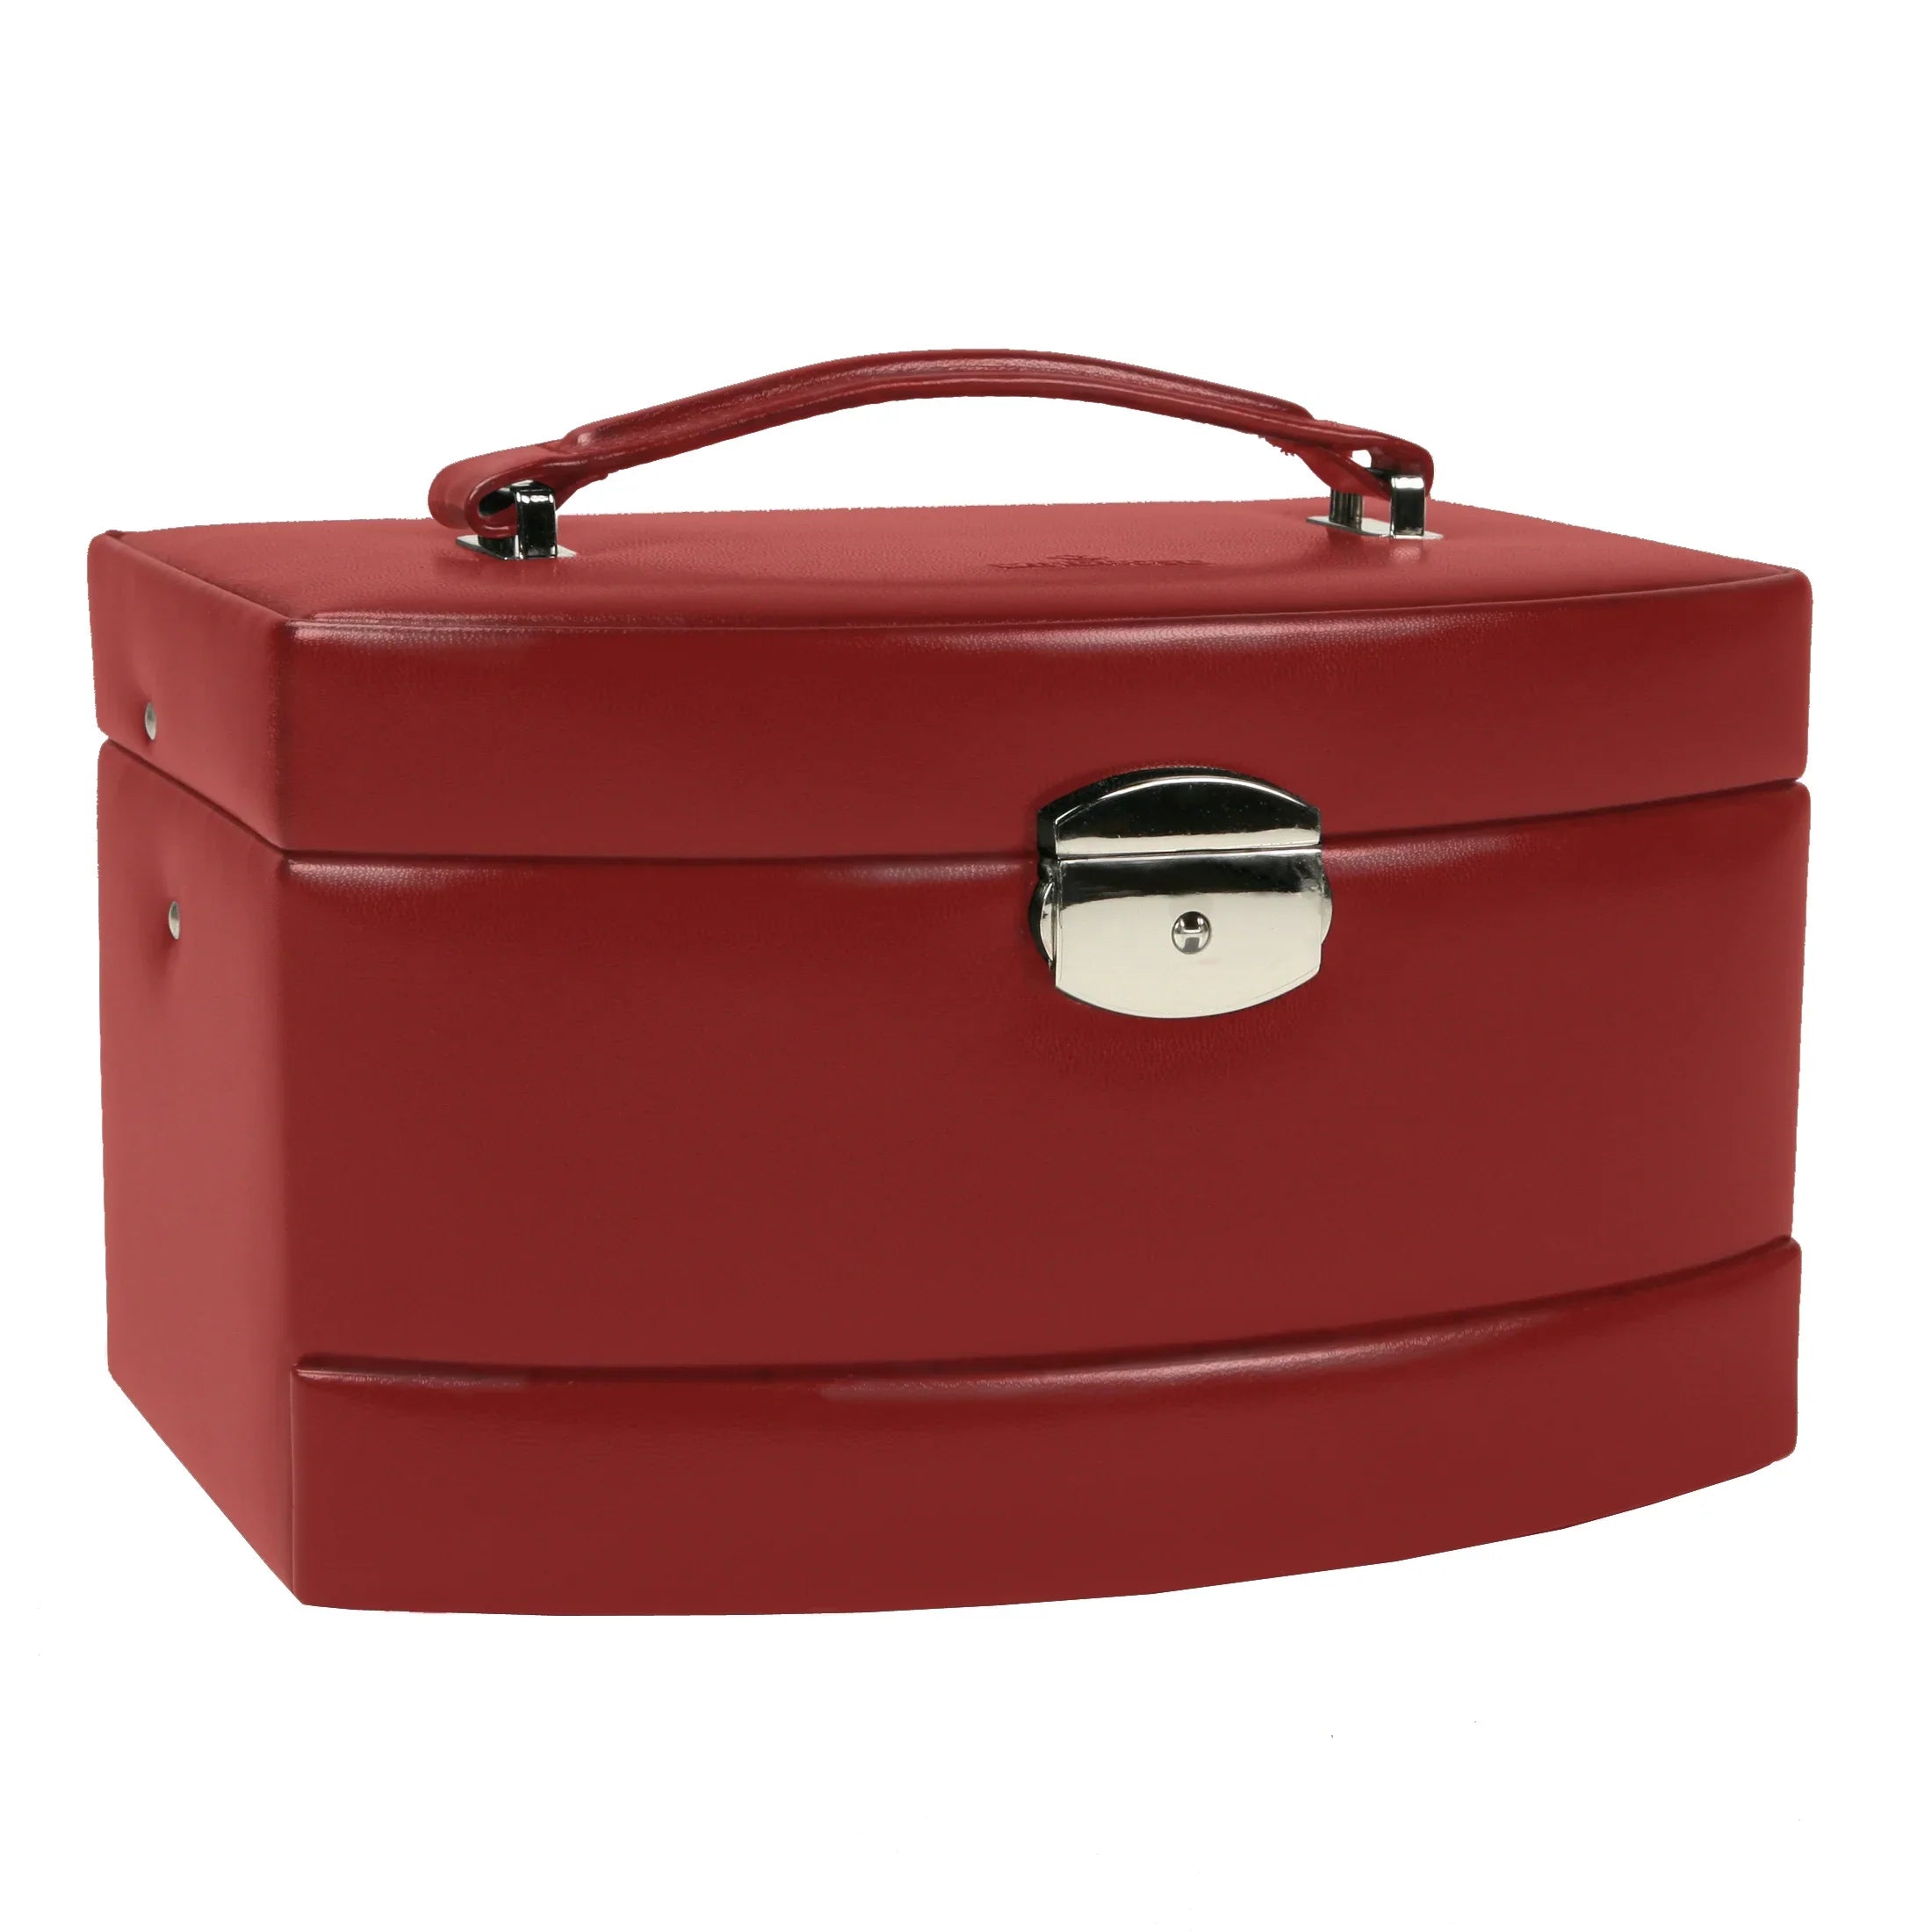 Windrose Merino automatic jewelry case with insert 23 cm - red